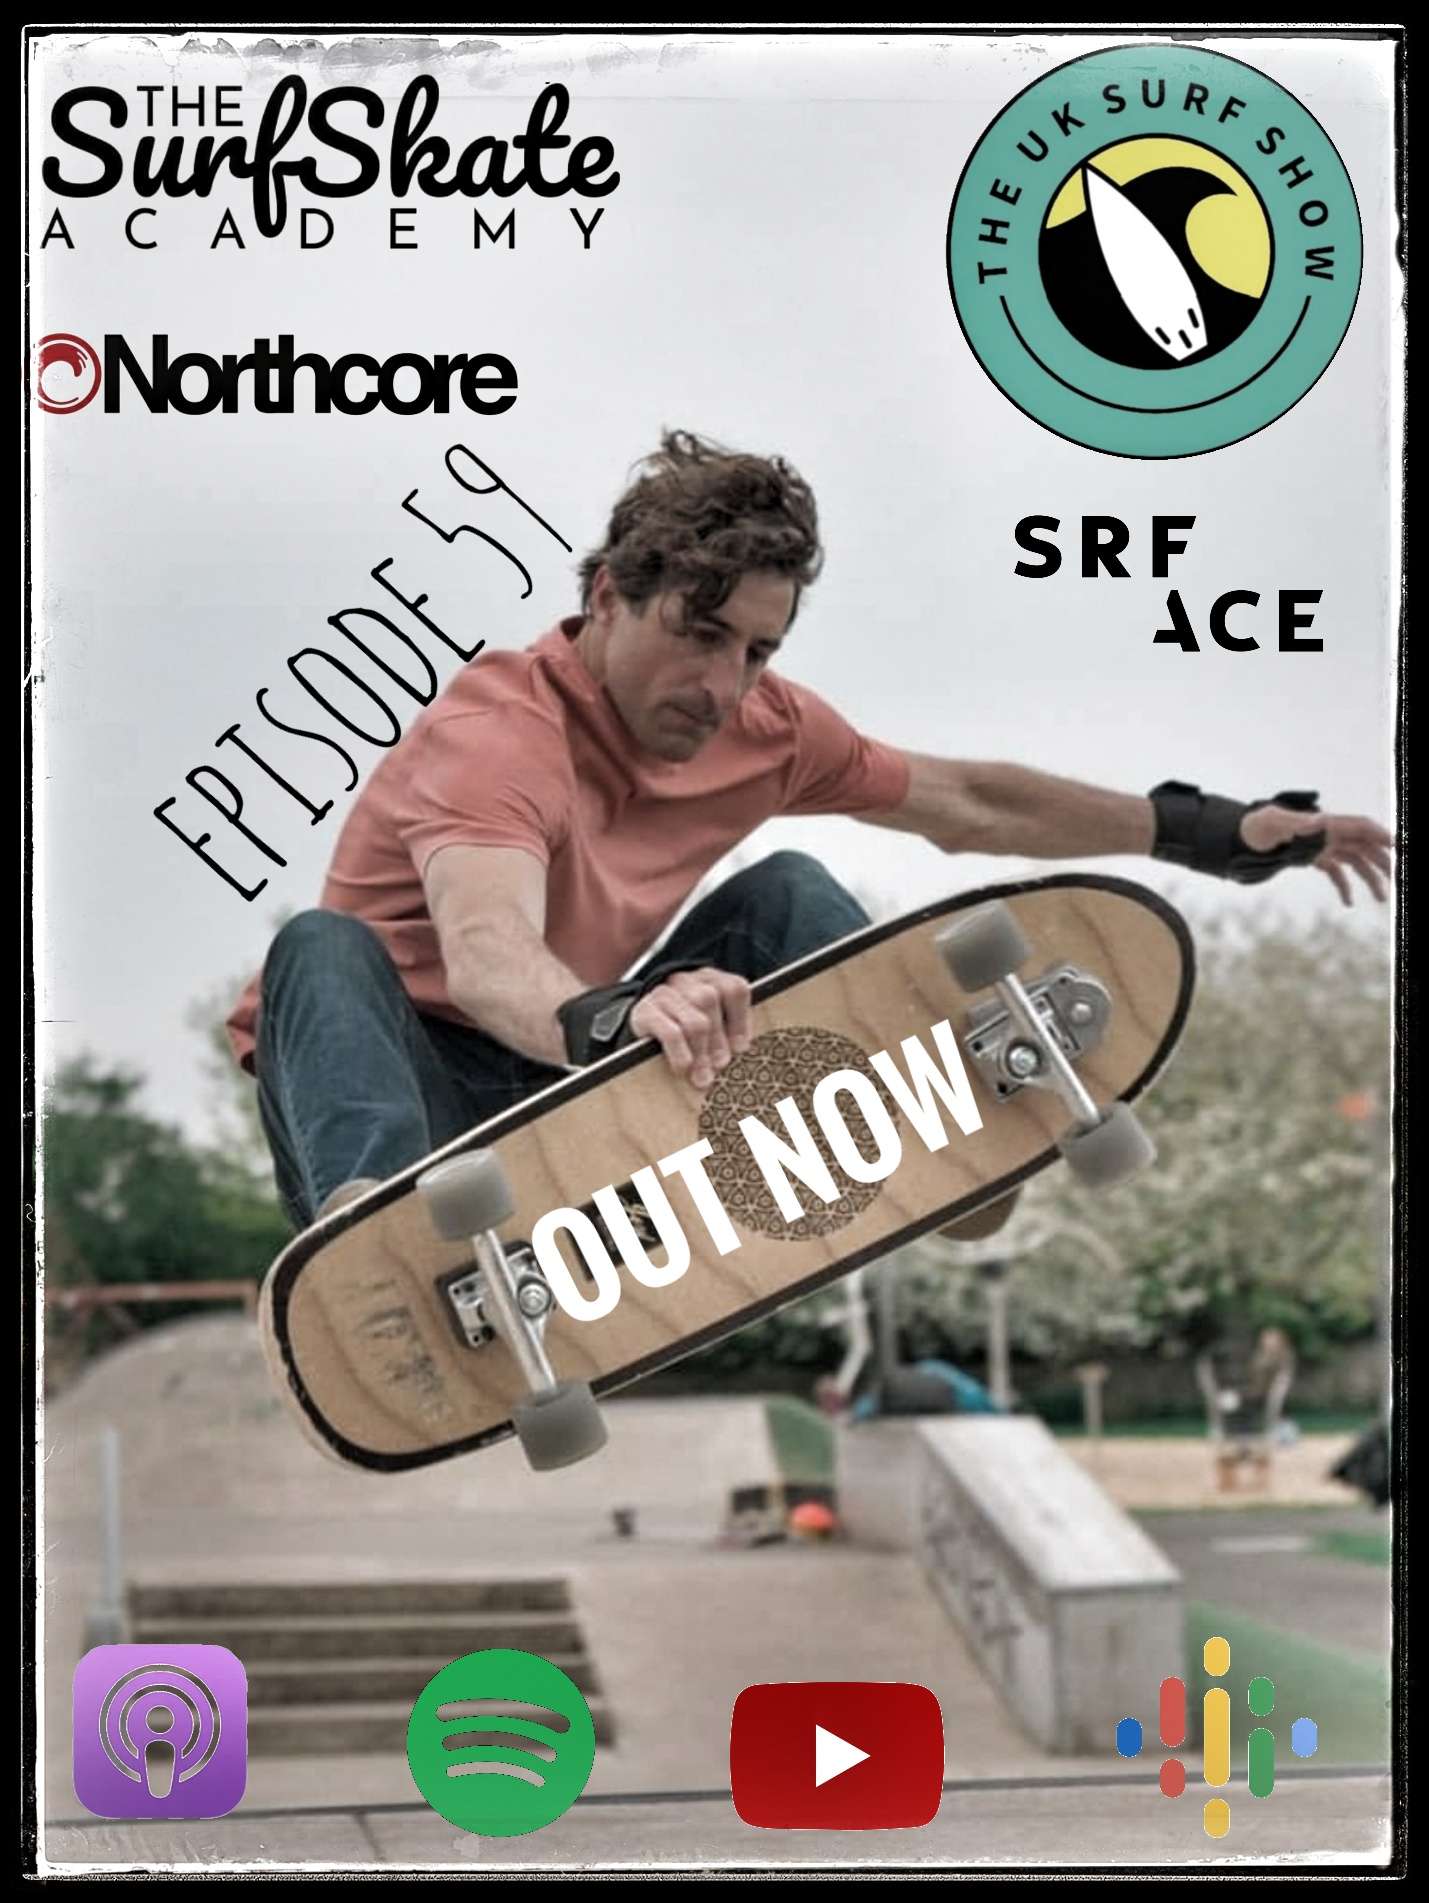 The SurfSkate Academy